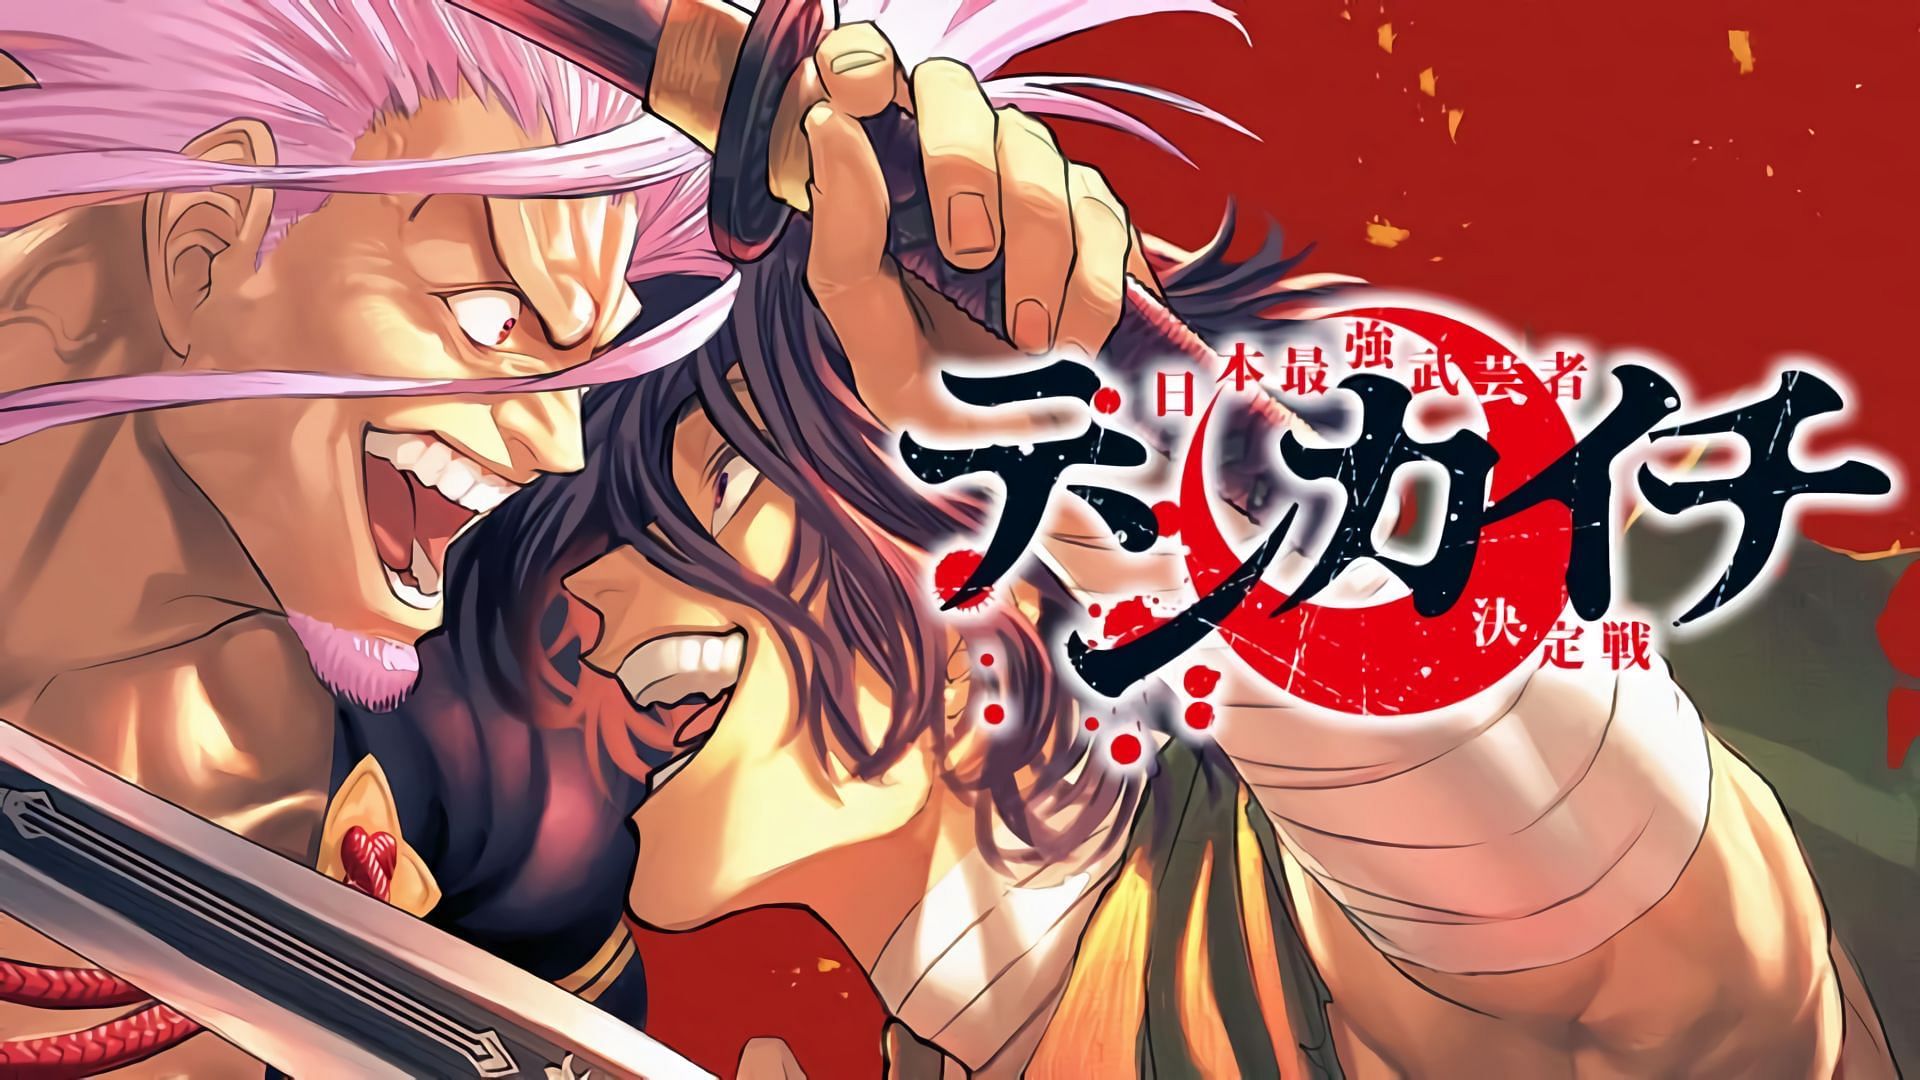 One-Punch Man Creator Launches New One-Shot, Bug Ego